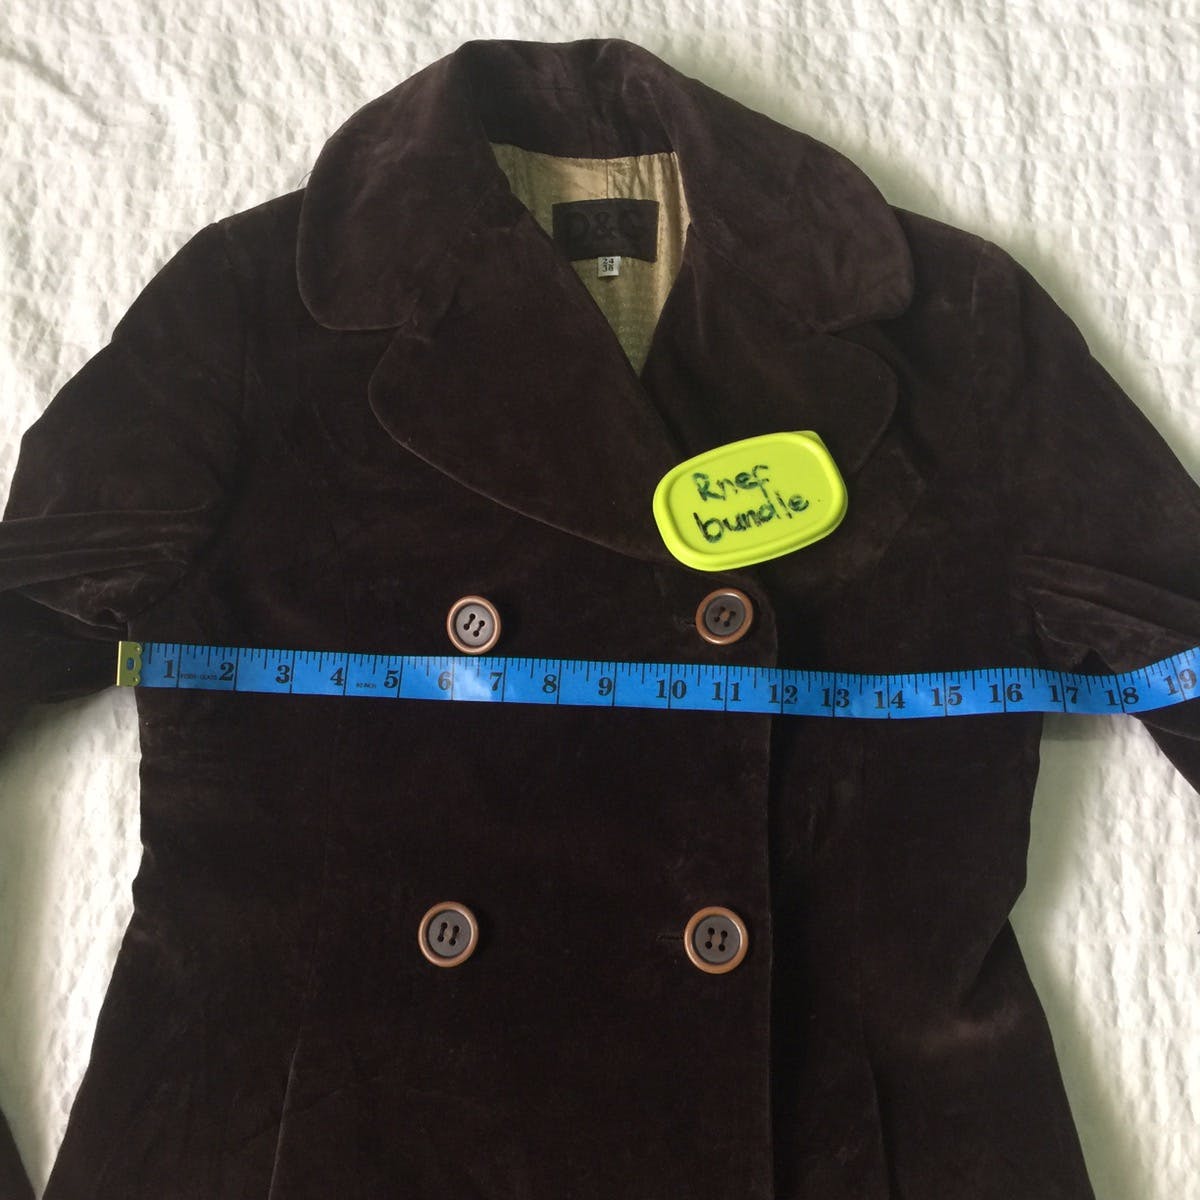 Authentic dolce & gabbana jacket made in Italy - 11